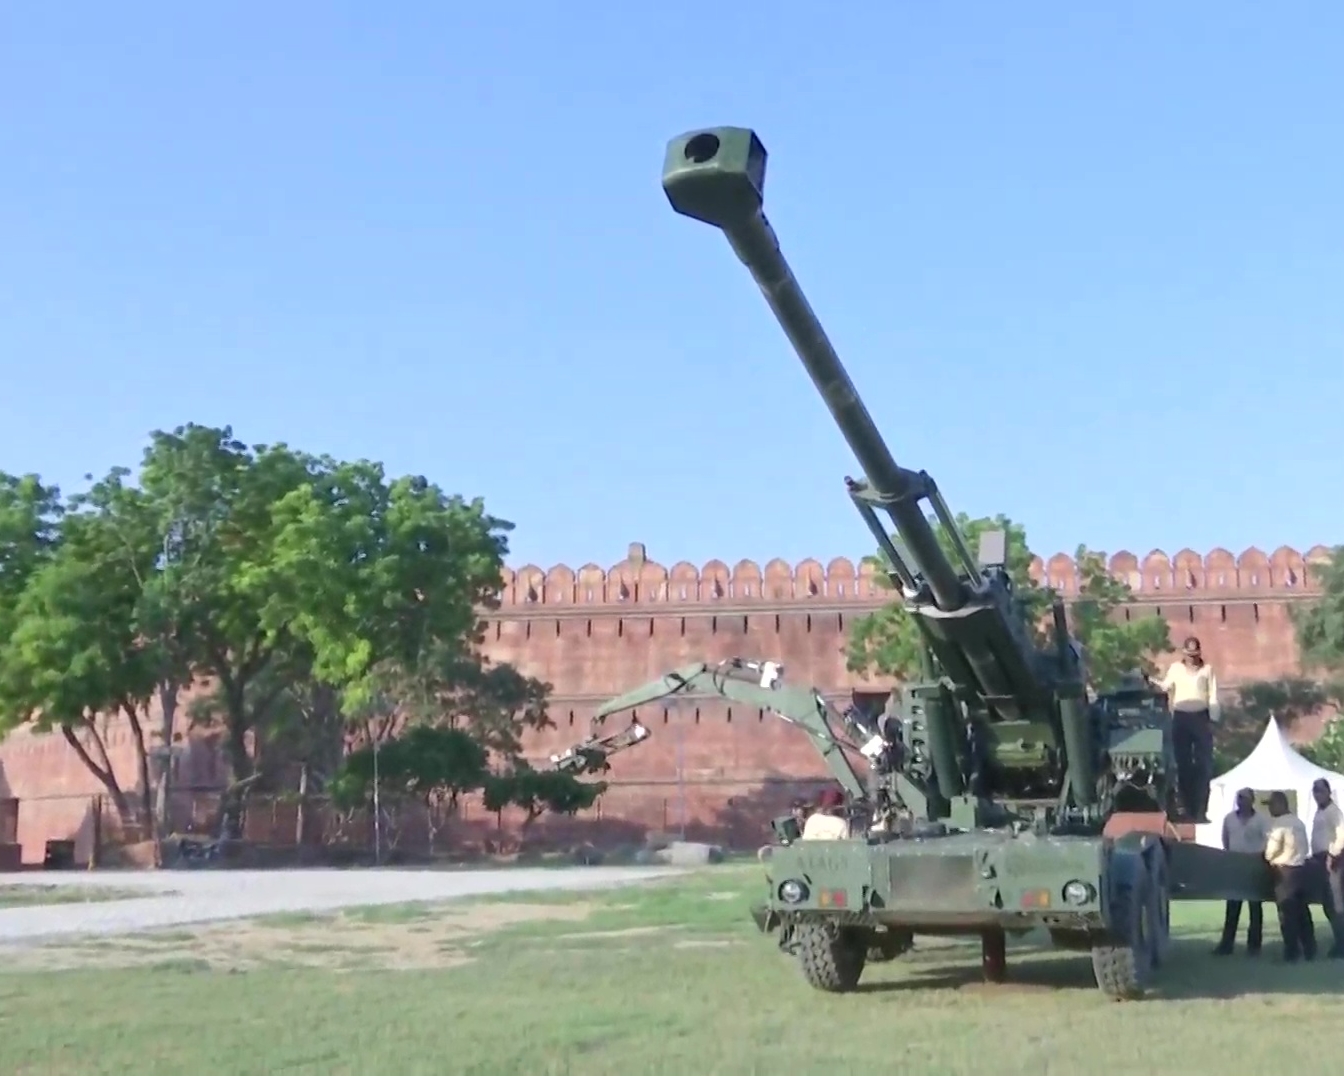 Made-In-India ATAGS Used For Ceremonial Gun Salute On Independence Day